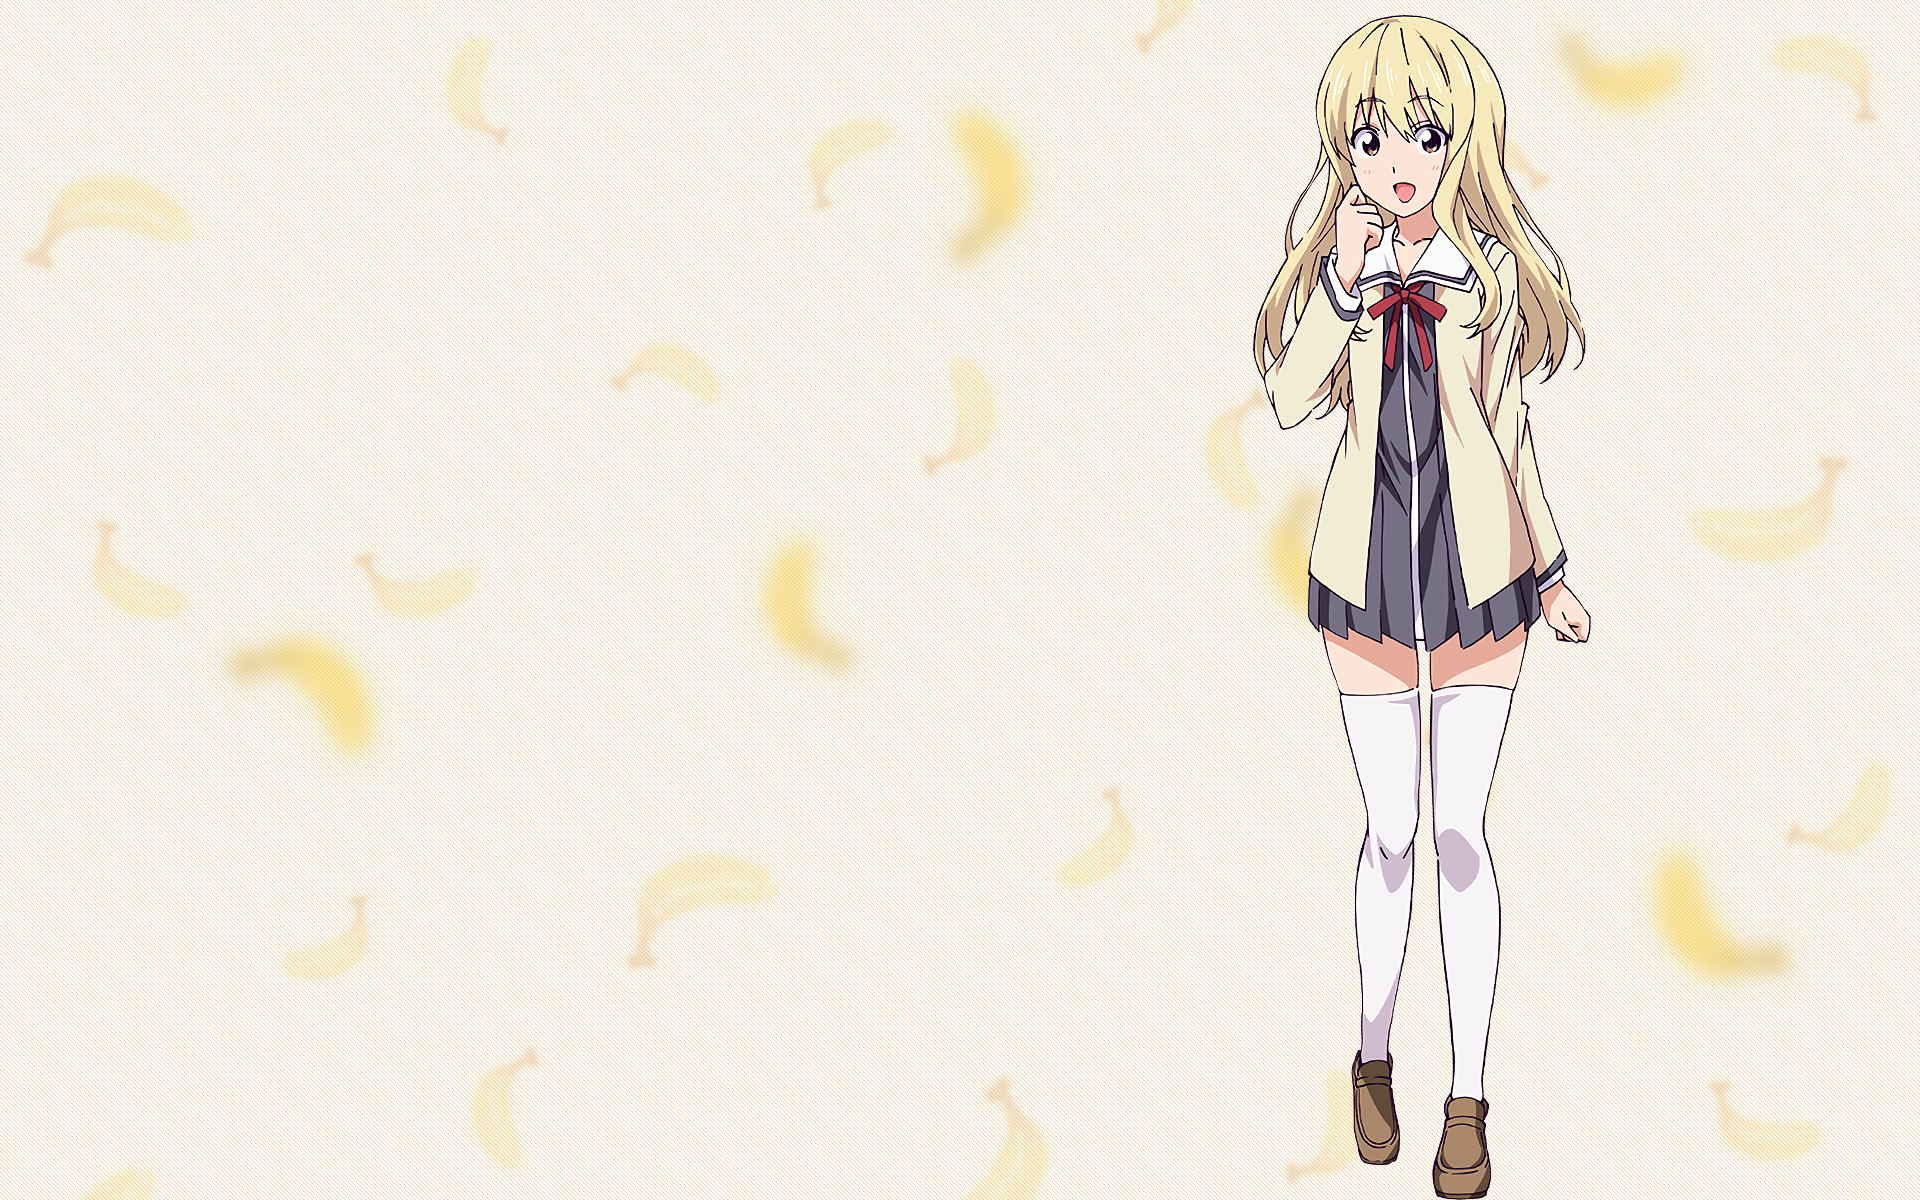 Aho Girl HD Wallpaper Background Image Id